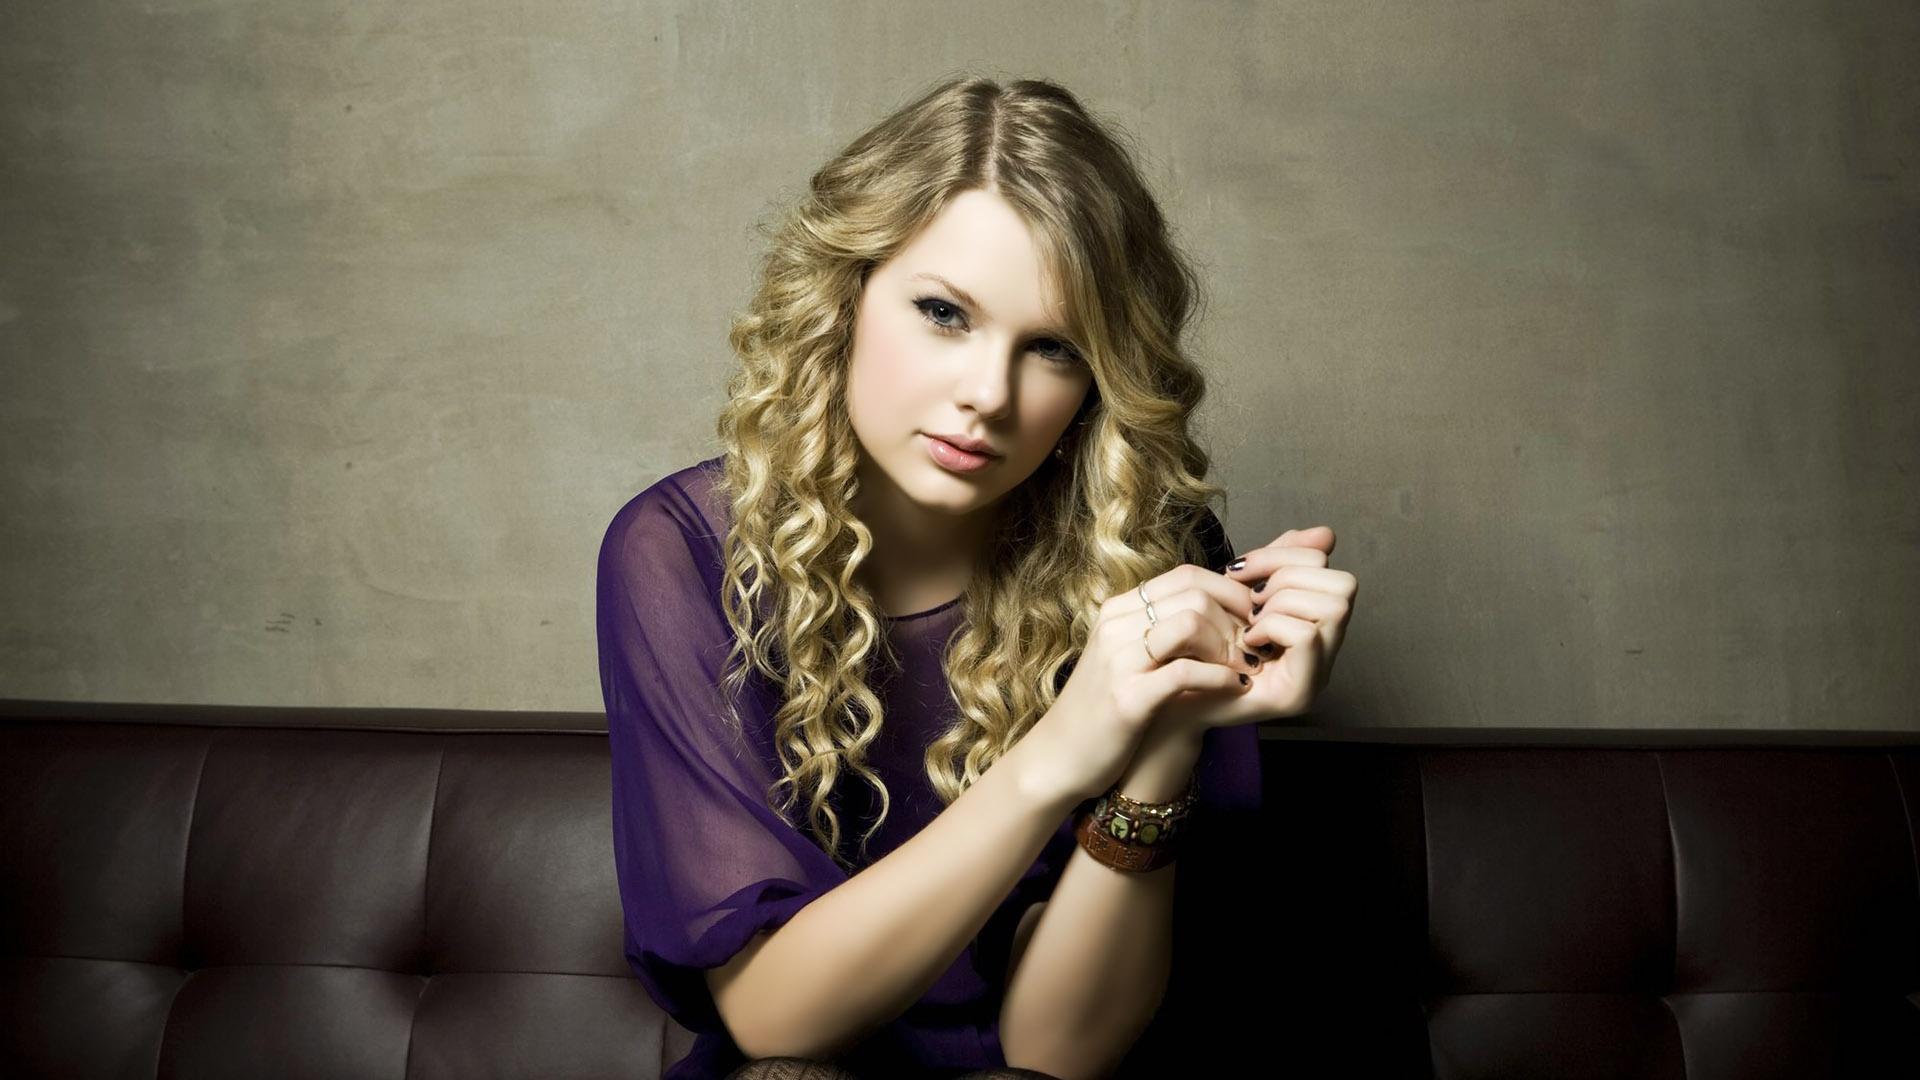 Free download Taylor Swift HD Taylor Swift Wallpaper 25909807 [1920x1080] for your Desktop, Mobile & Tablet. Explore Taylor Swift Speak Now Wallpaper. Taylor Swift Speak Now Wallpaper, Taylor Swift